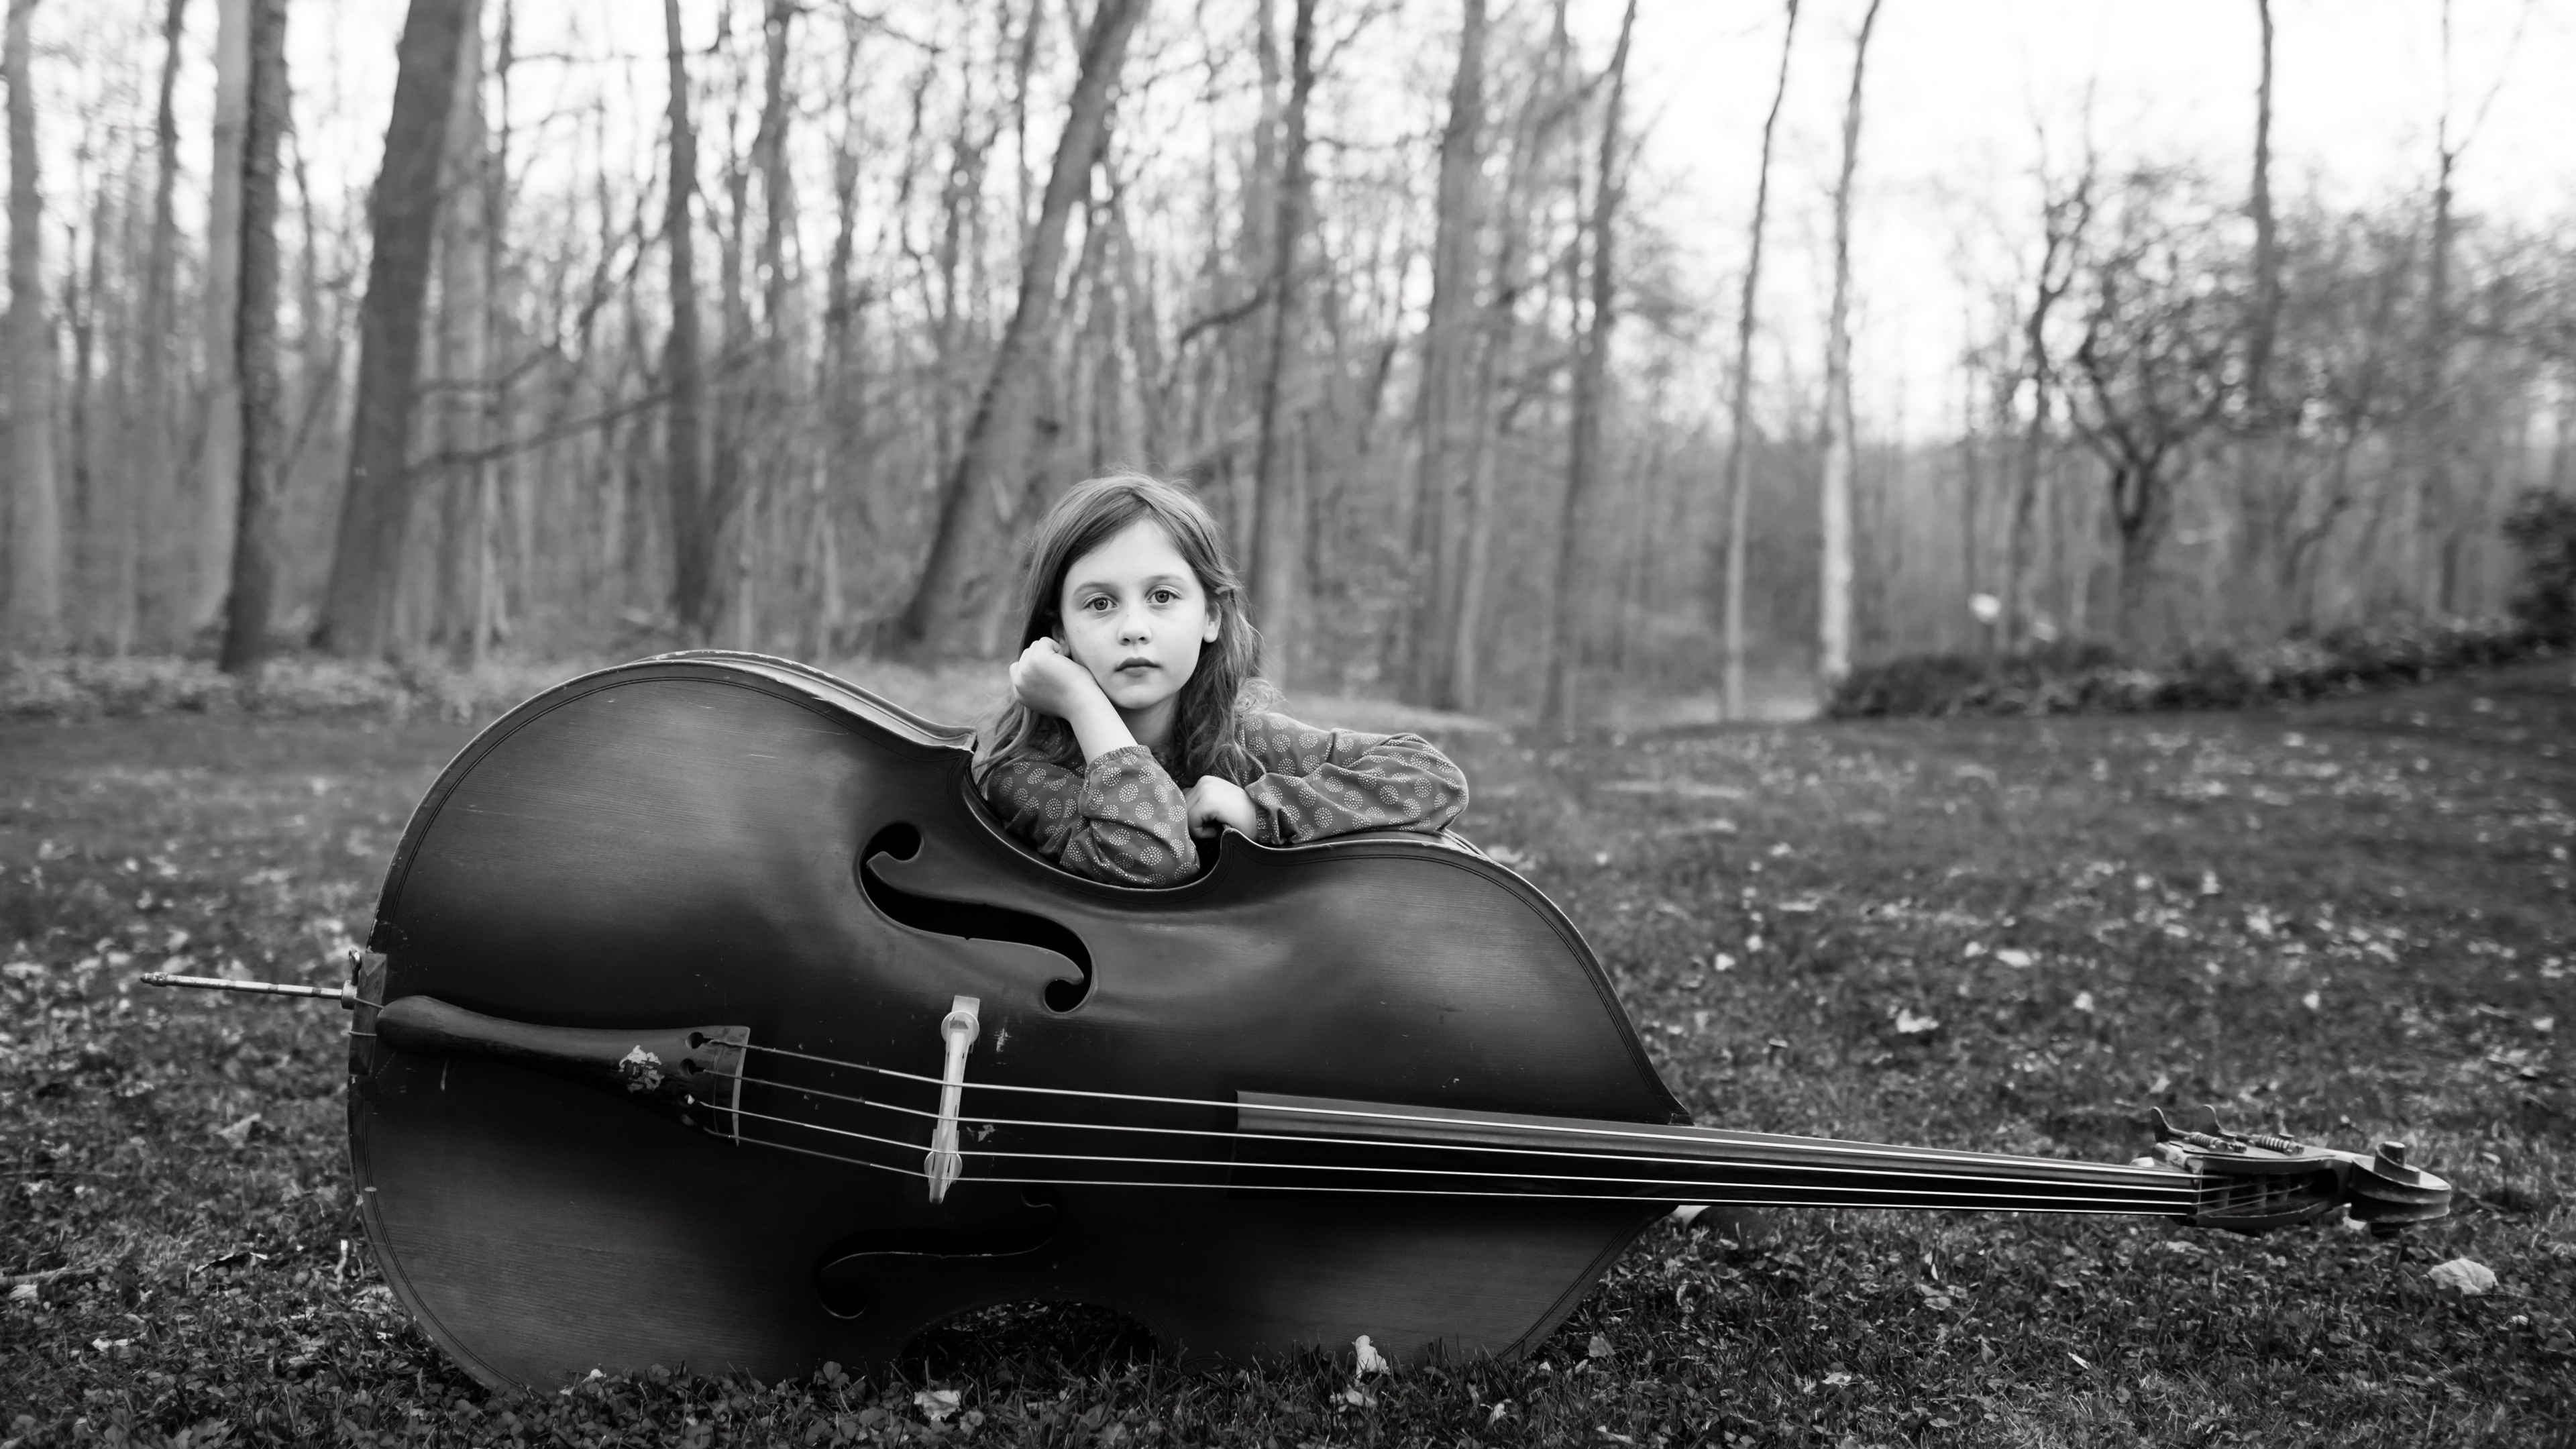 Double Bass: Monochrome, The Largest String Instrument In The Modern Symphony Orchestra. 3840x2160 4K Background.